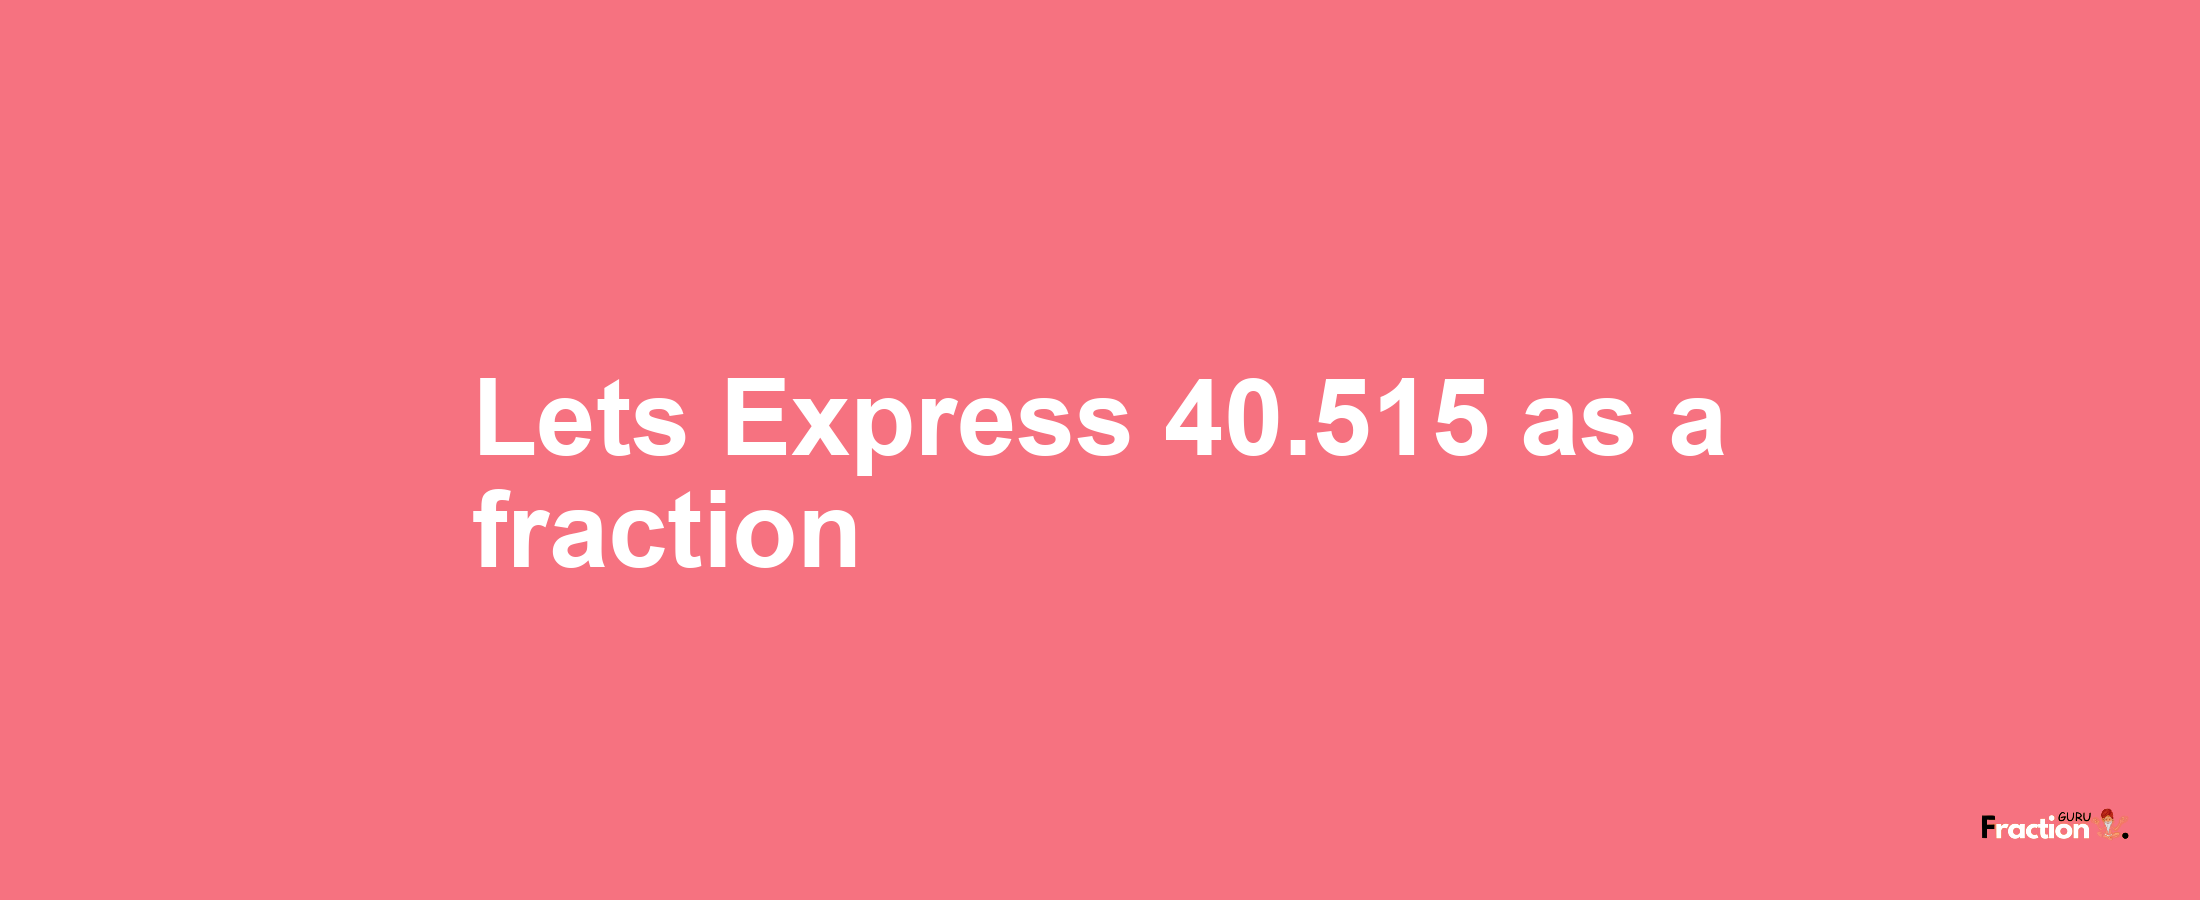 Lets Express 40.515 as afraction